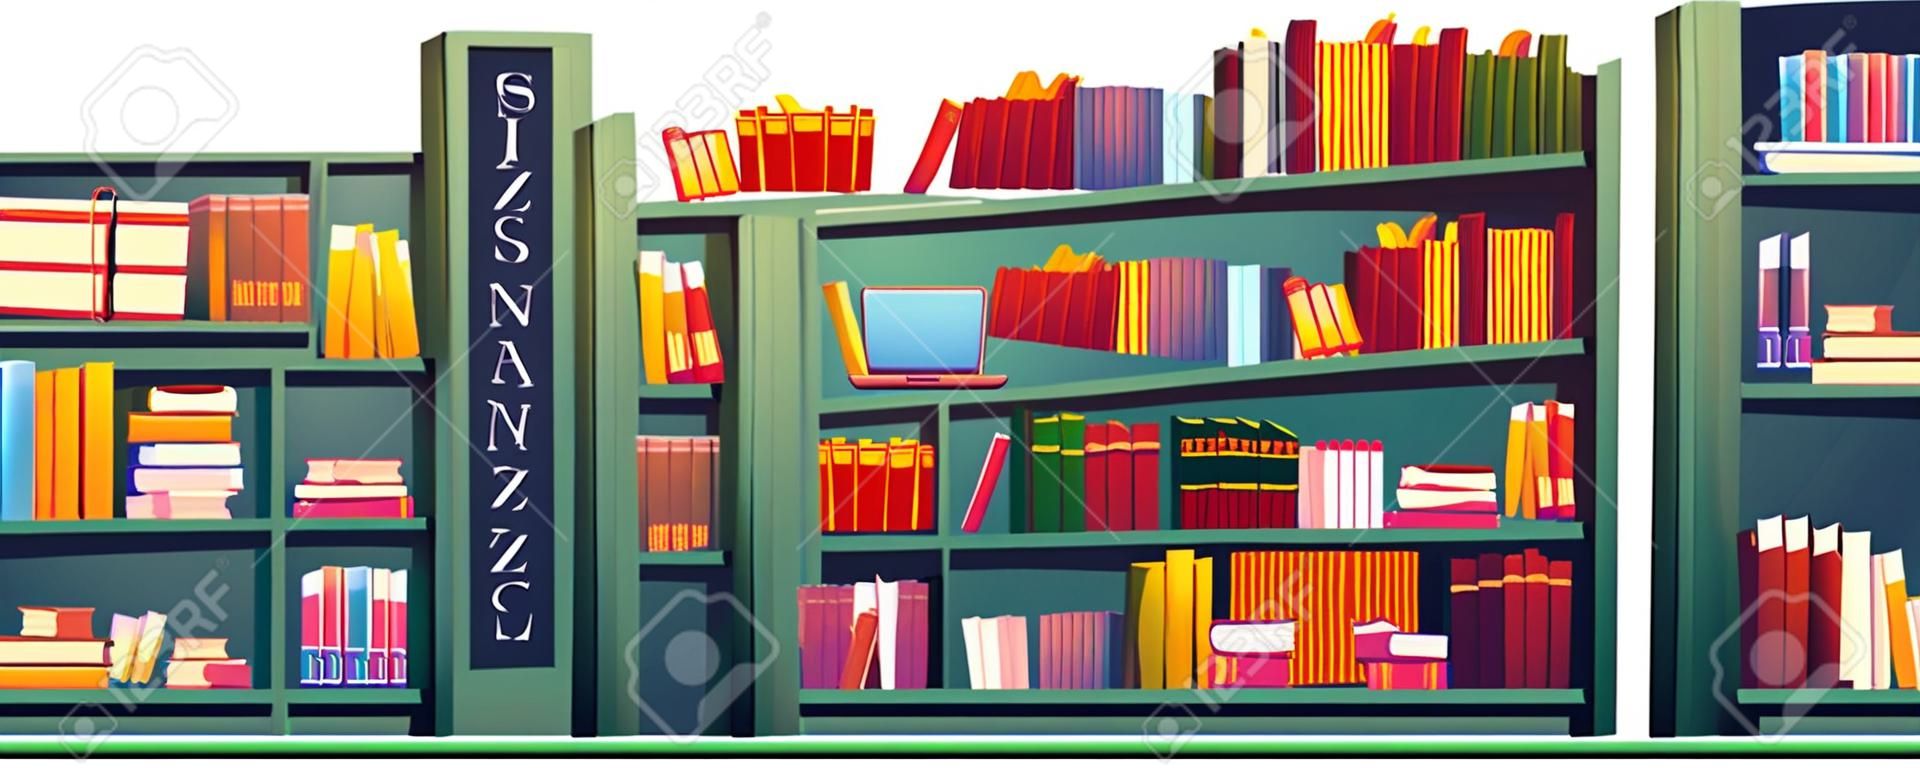 Library with books on shelves and laptop on table. Vector cartoon illustration of school, university or public library or store with bookcase, desk for study and lamp isolated on white background